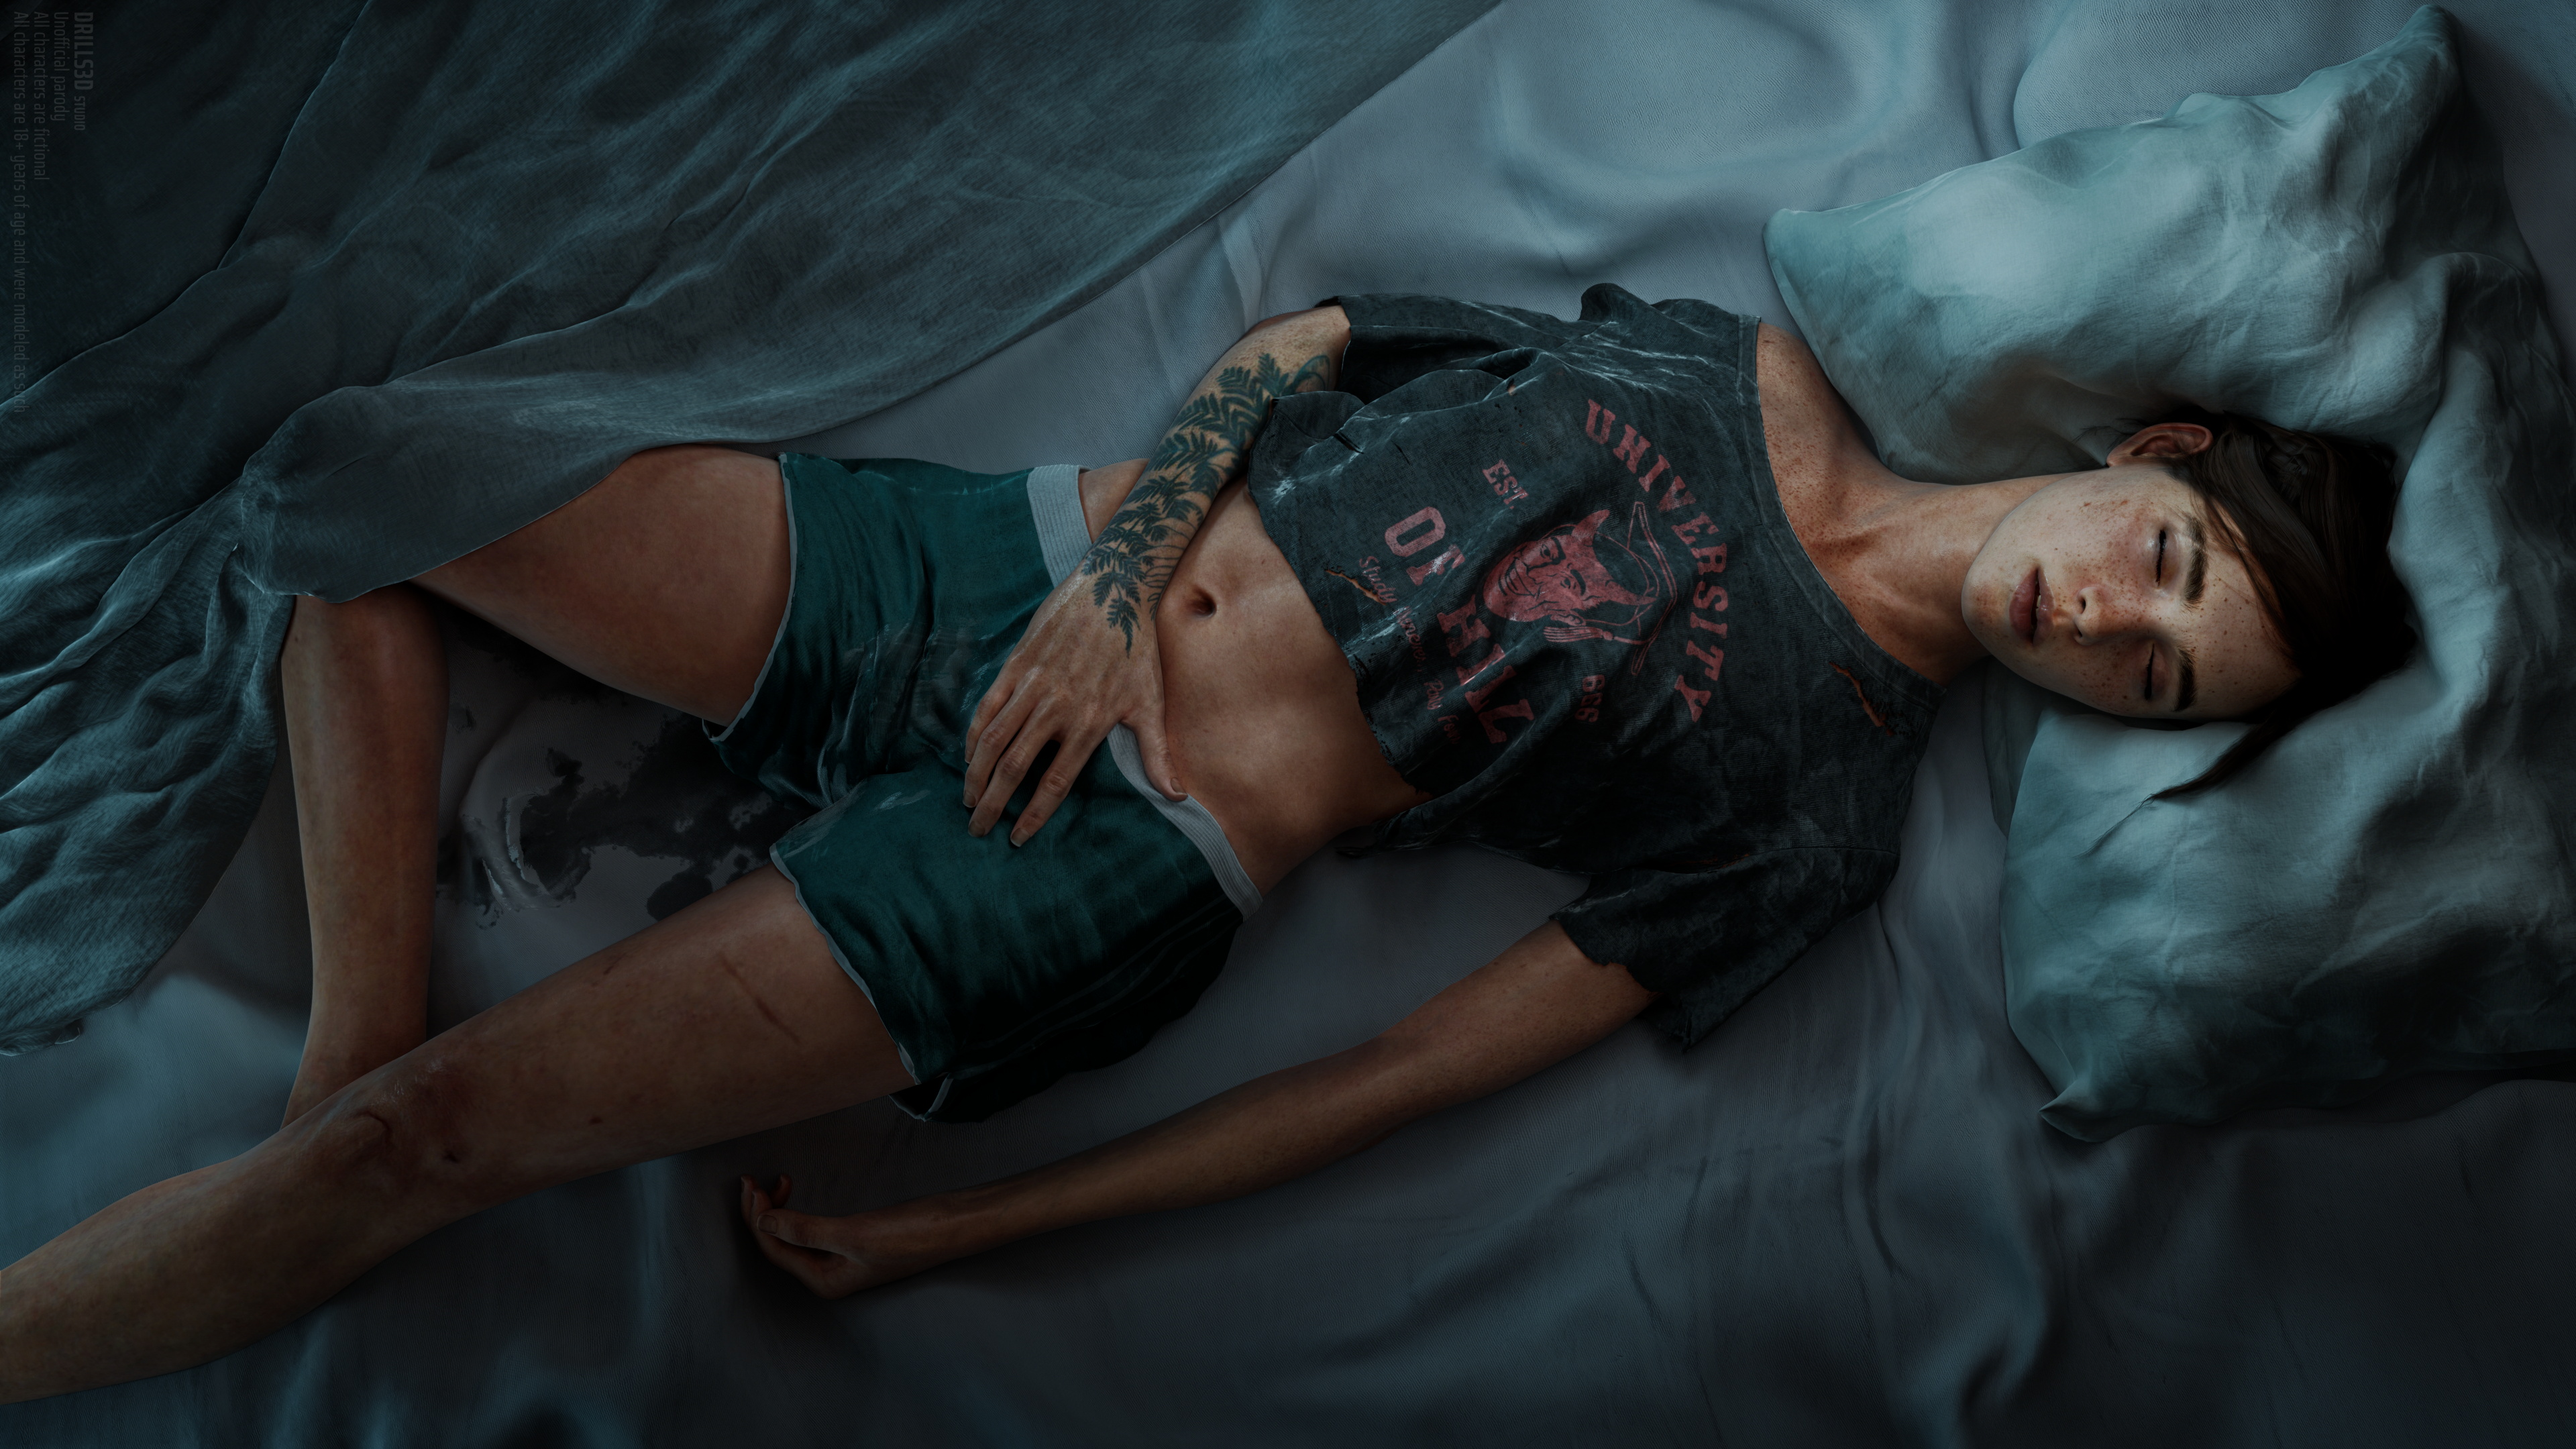 General 3840x2160 illustration artwork digital art The Last of Us Ellie Williams short hair in bed belly belly button closed eyes parted lips video games video game girls shorts short tops tattoo freckles top view video game characters CGI The Last of Us 2 fan art